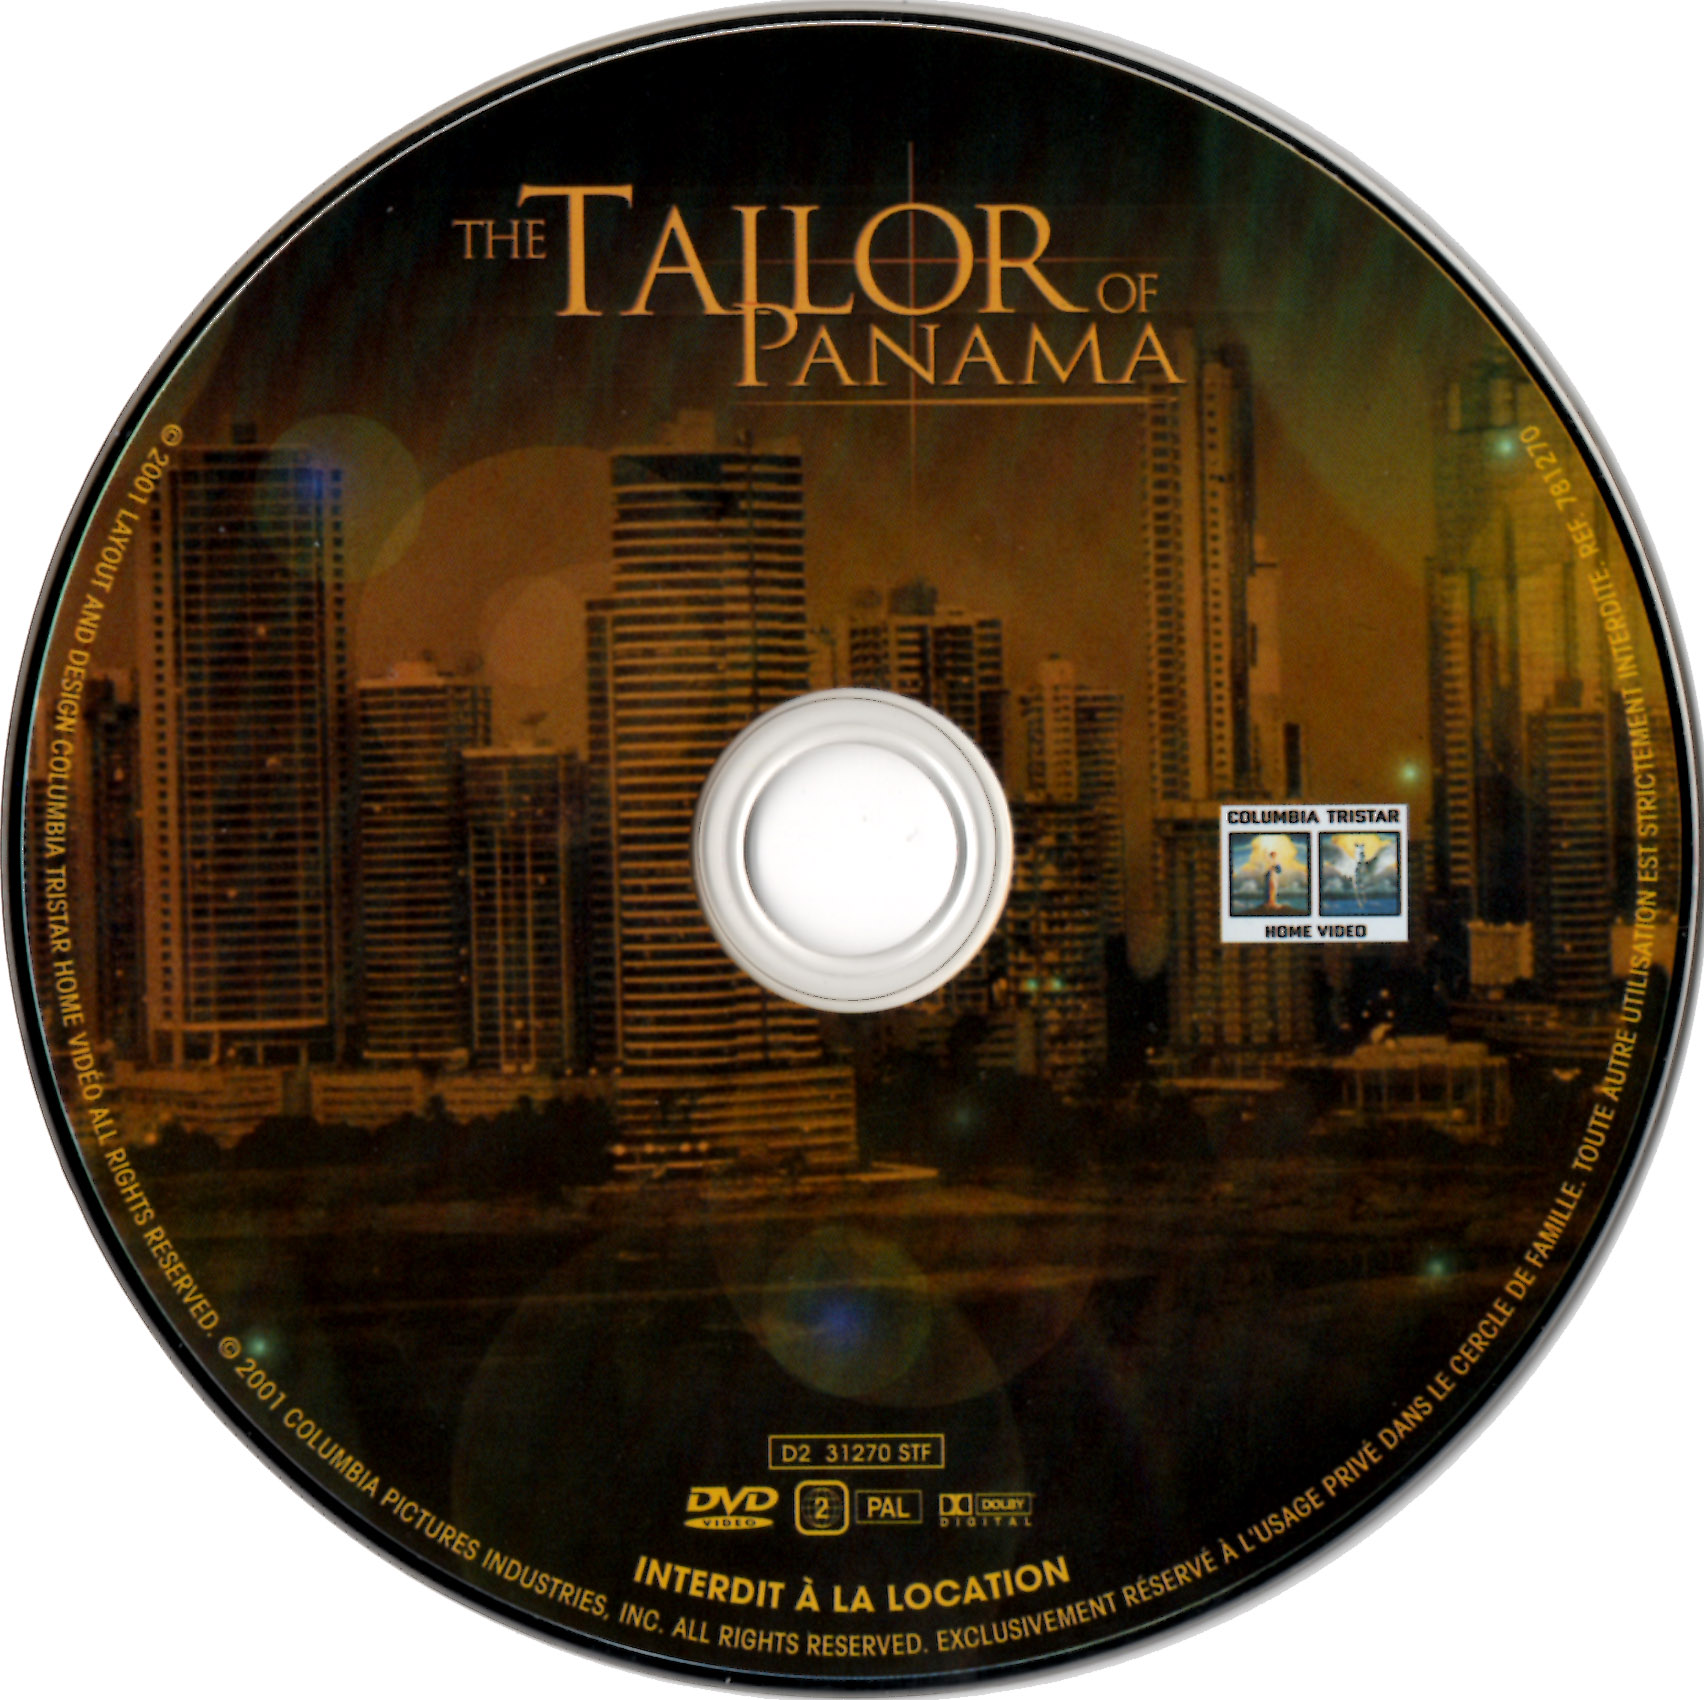 The tailor of Panama